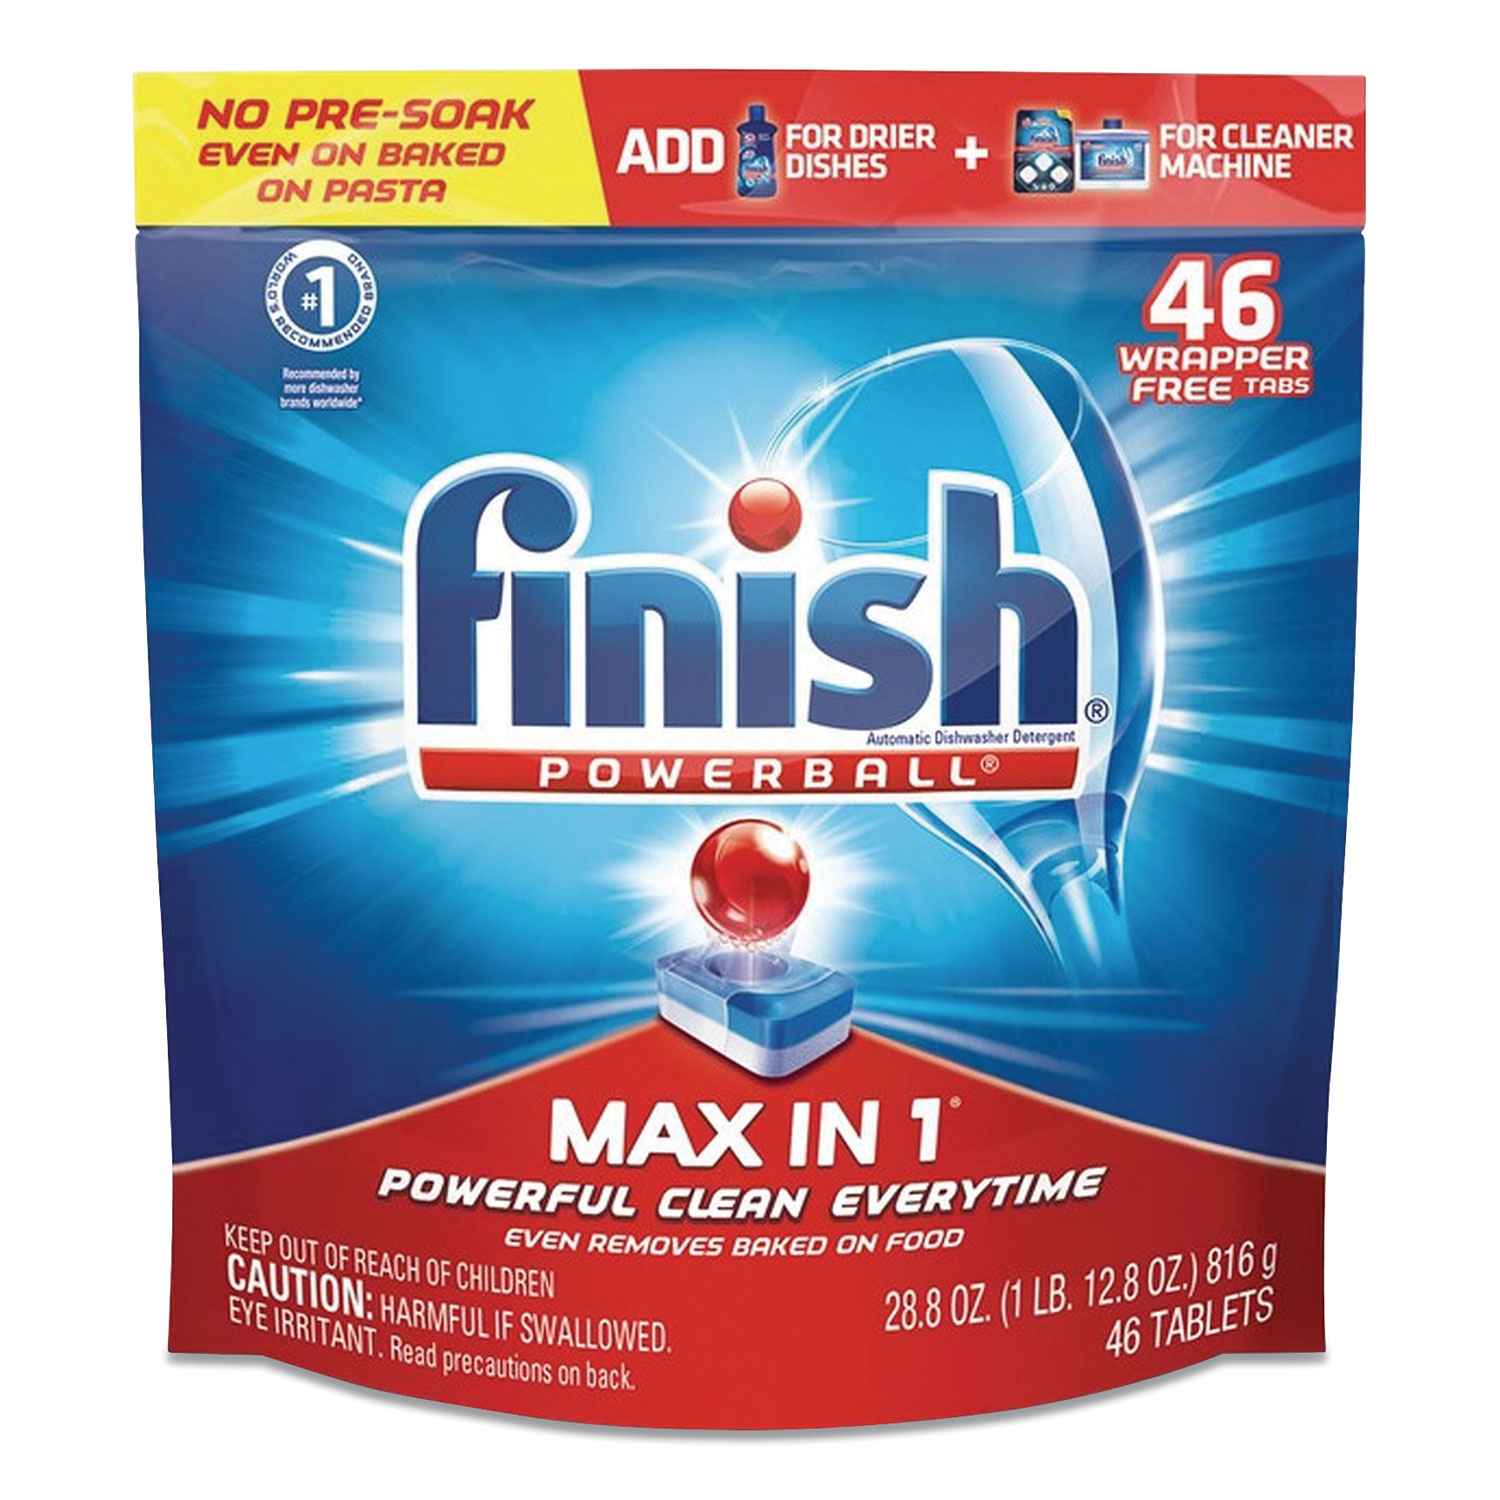 Powerball Max in 1 Dishwasher Tabs, Original Scent, 46/Pack